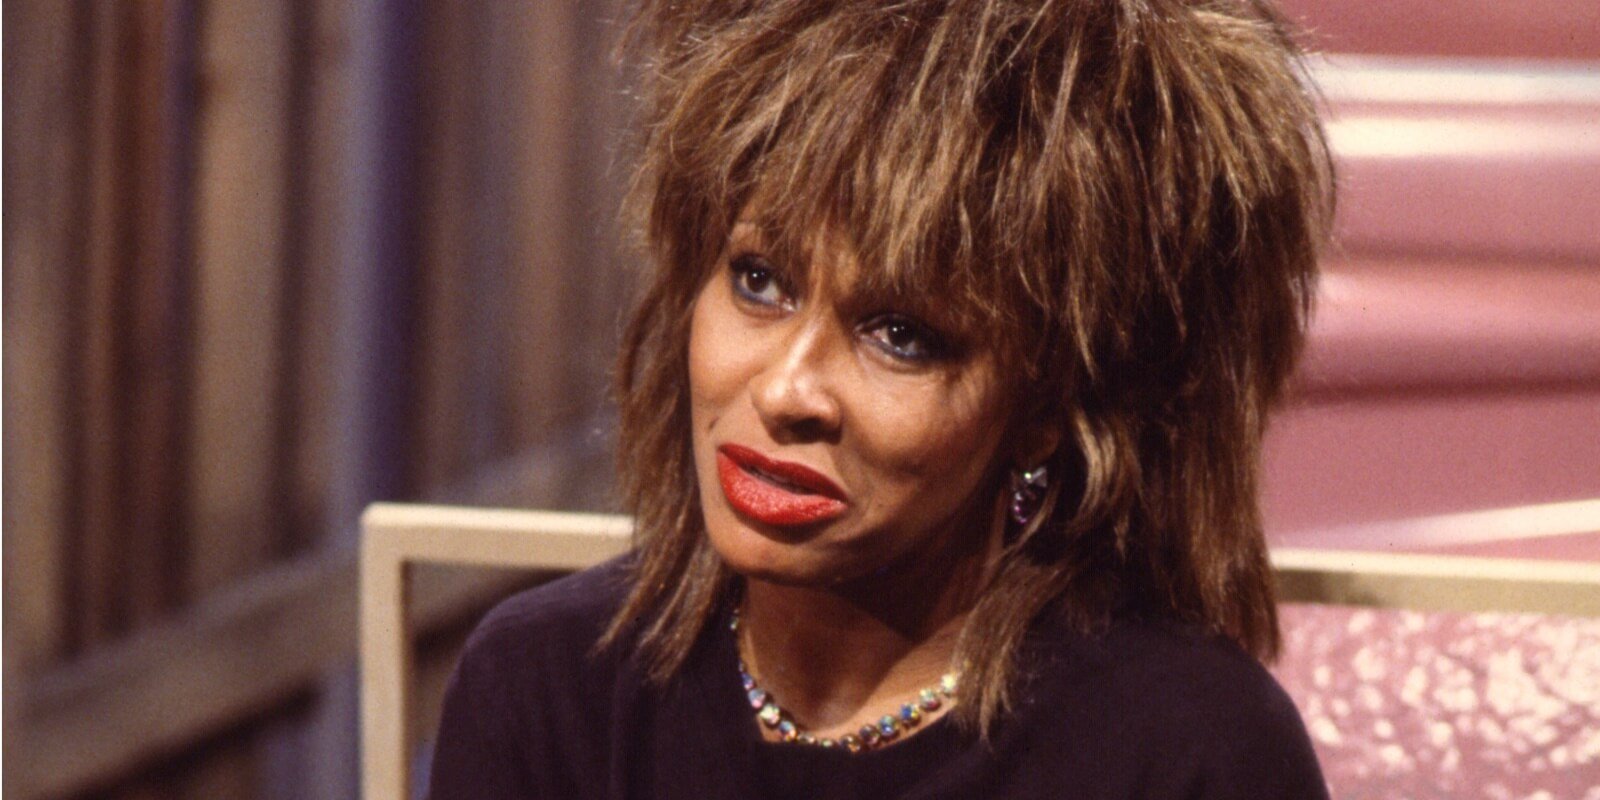 Tina Turner in an interview with MTV which aired in 1984.